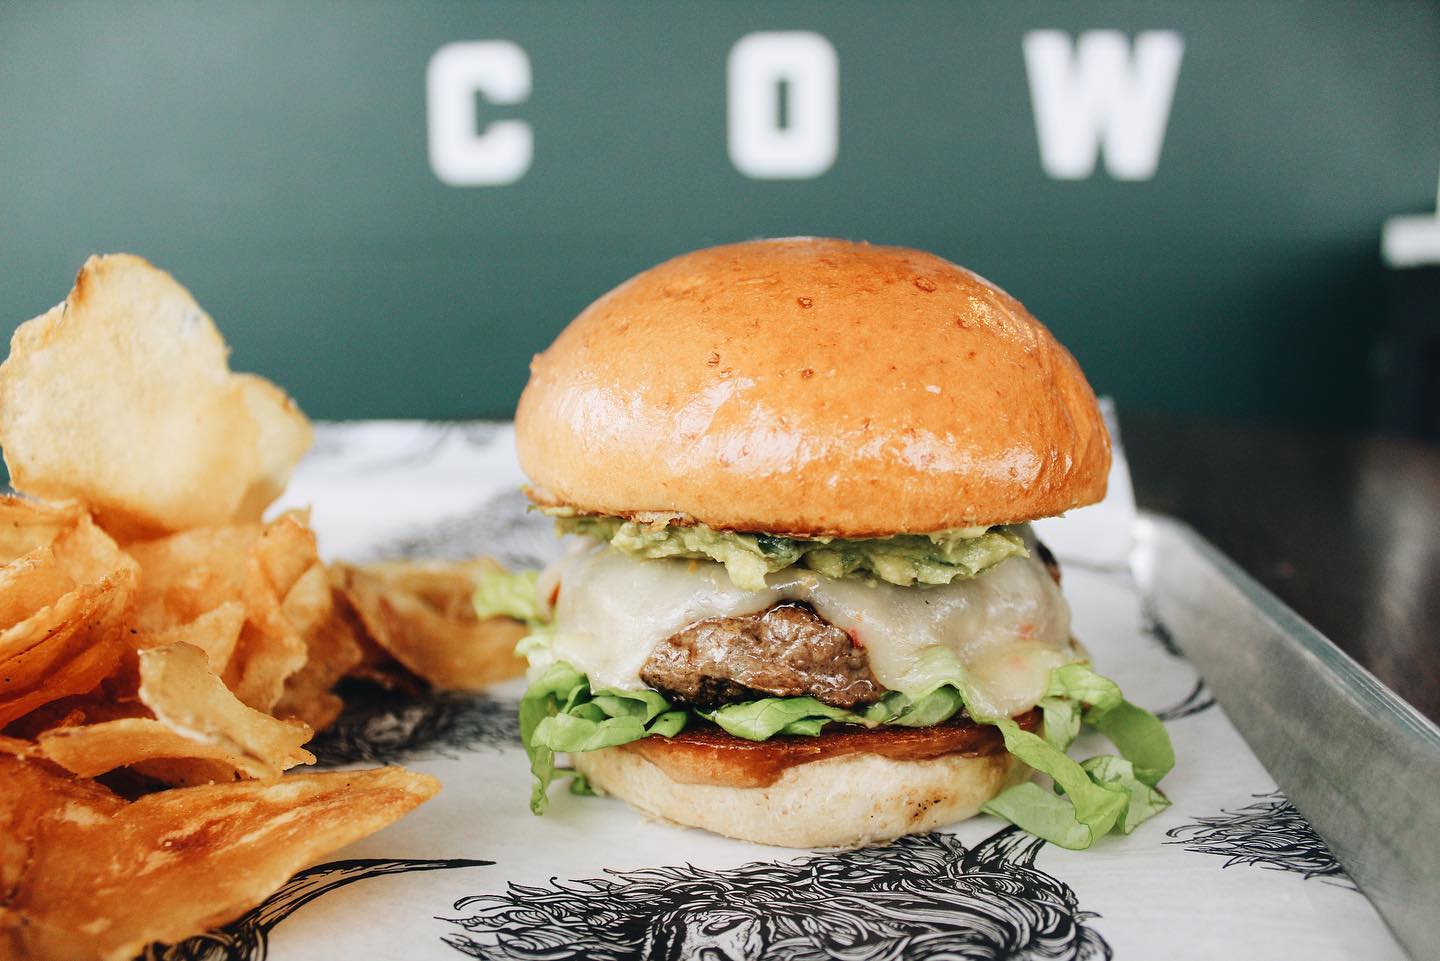 a copper cow burger and chips photographed in front of a wall reading "cow"